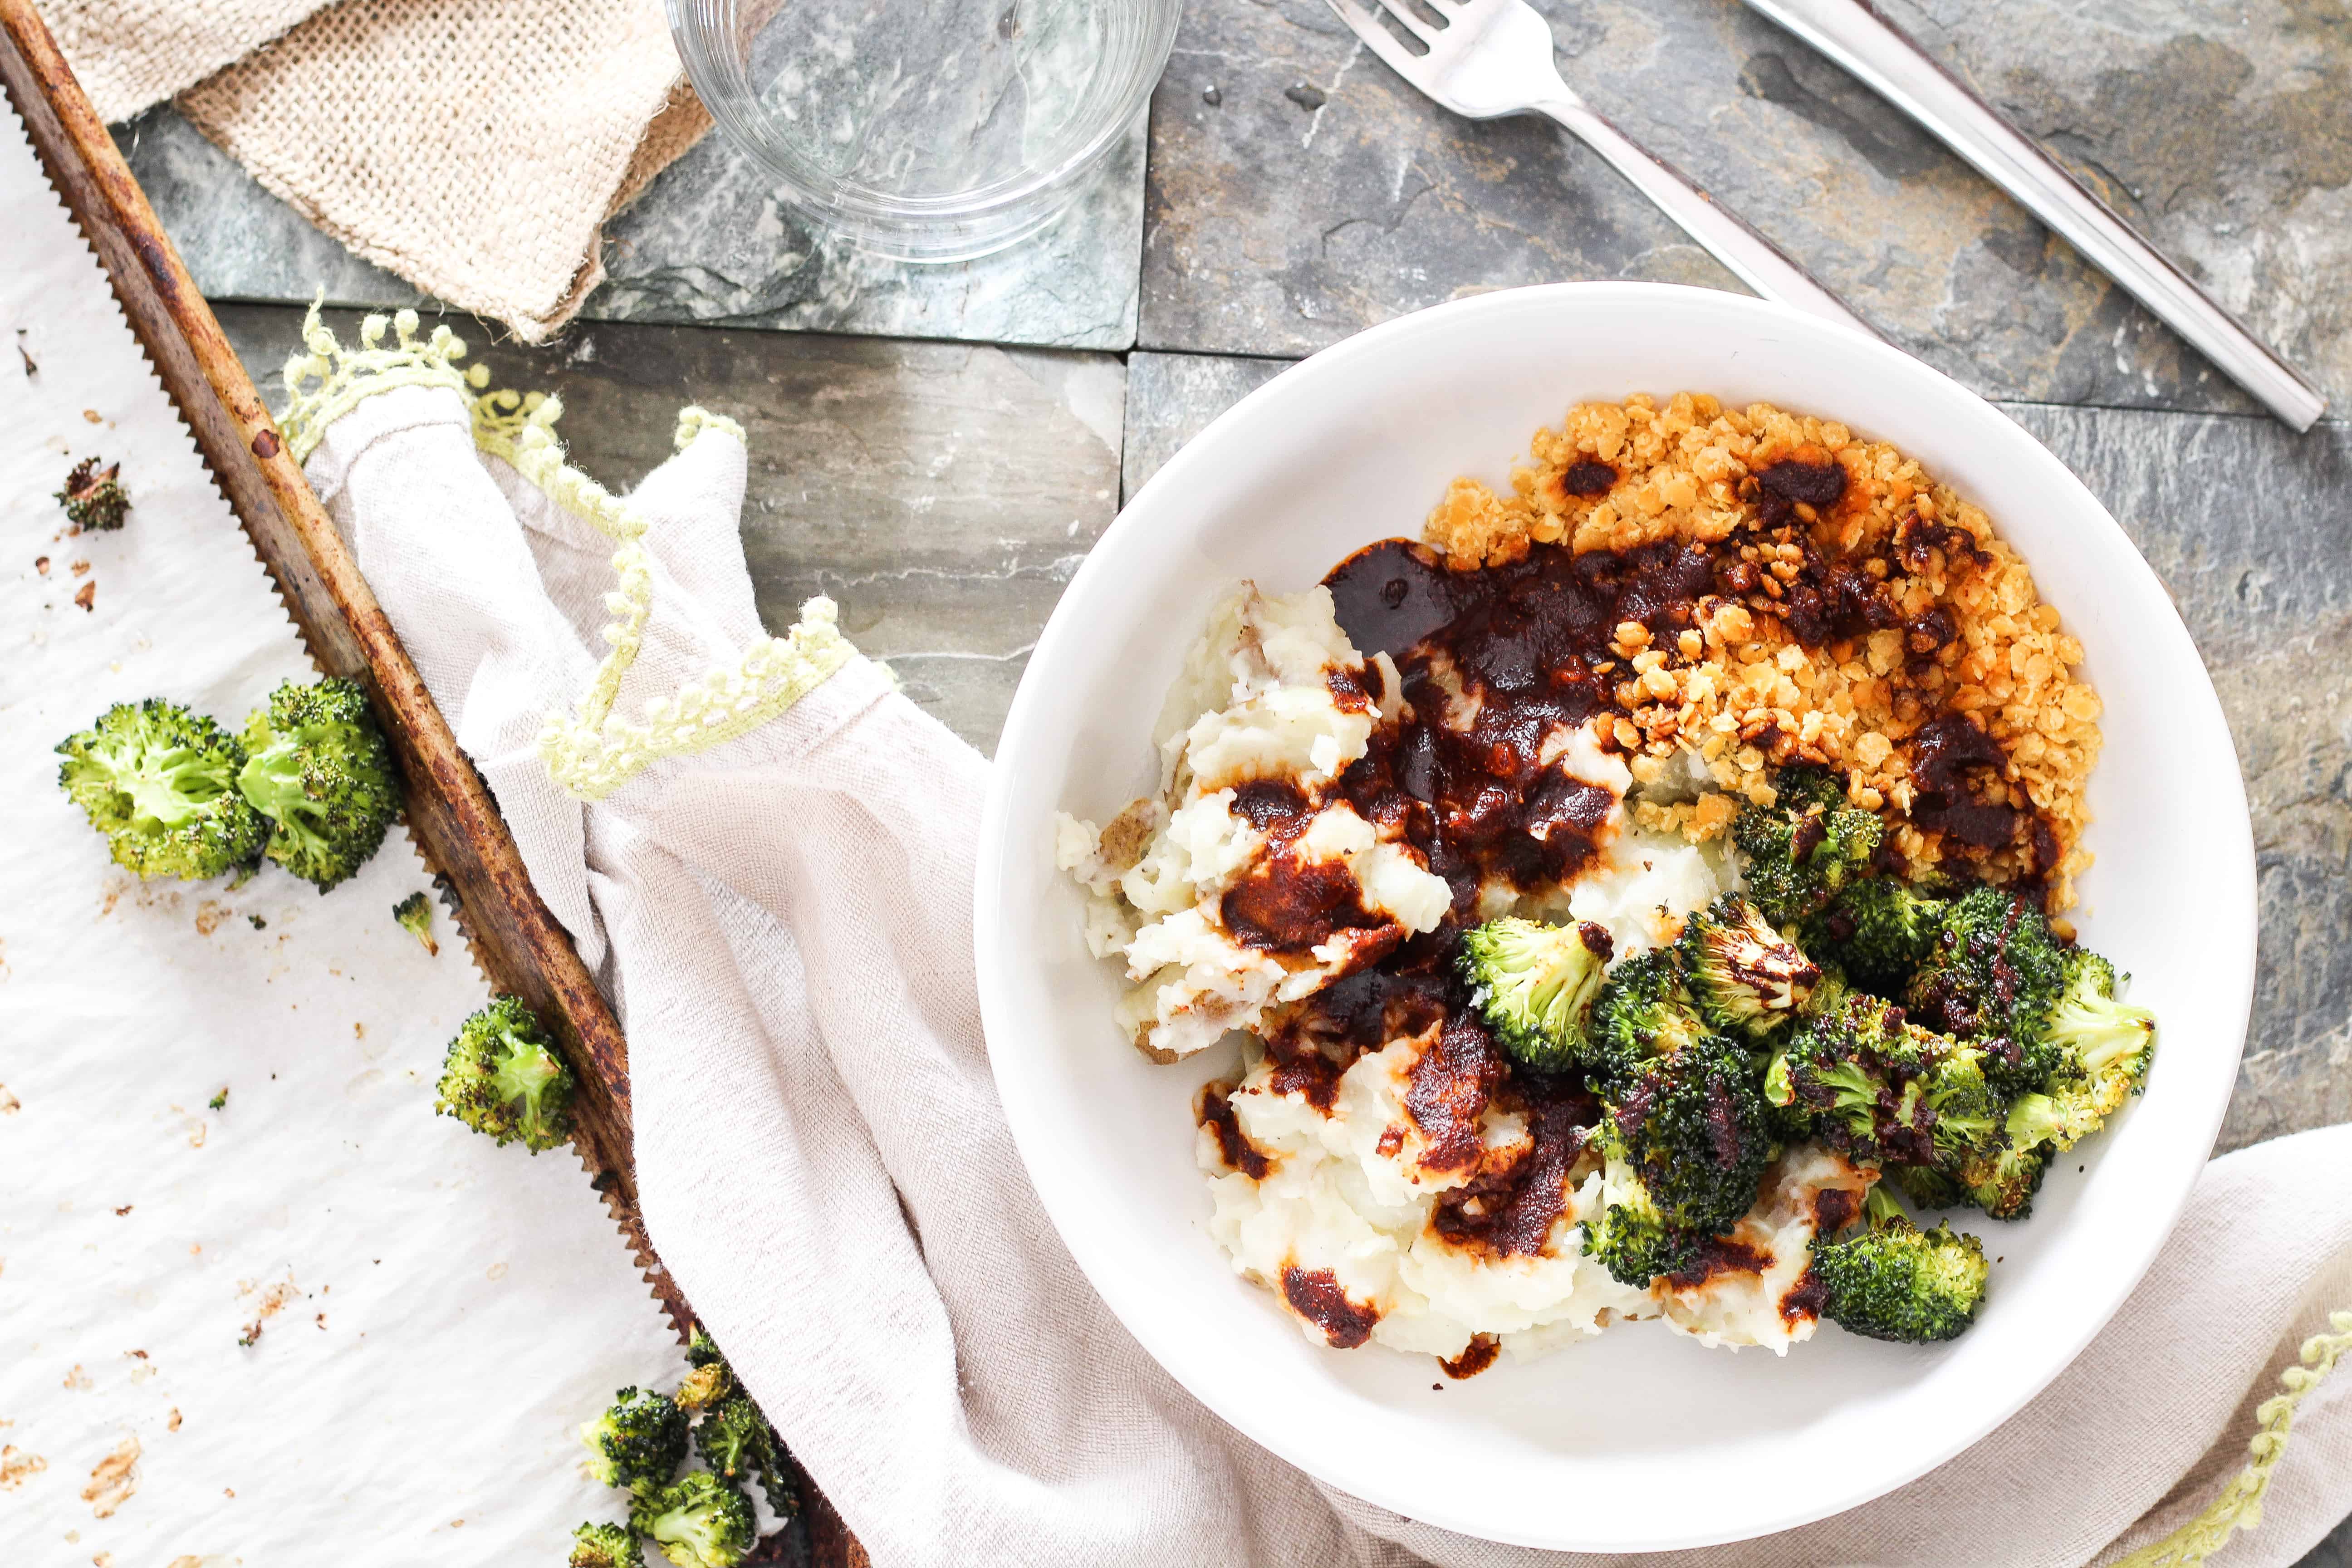 Refuel after a tough workout with nourishing and protein-rich plant-based BBQ Lentil Mashed Potato Bowls with zesty balsamic barbecue sauce.